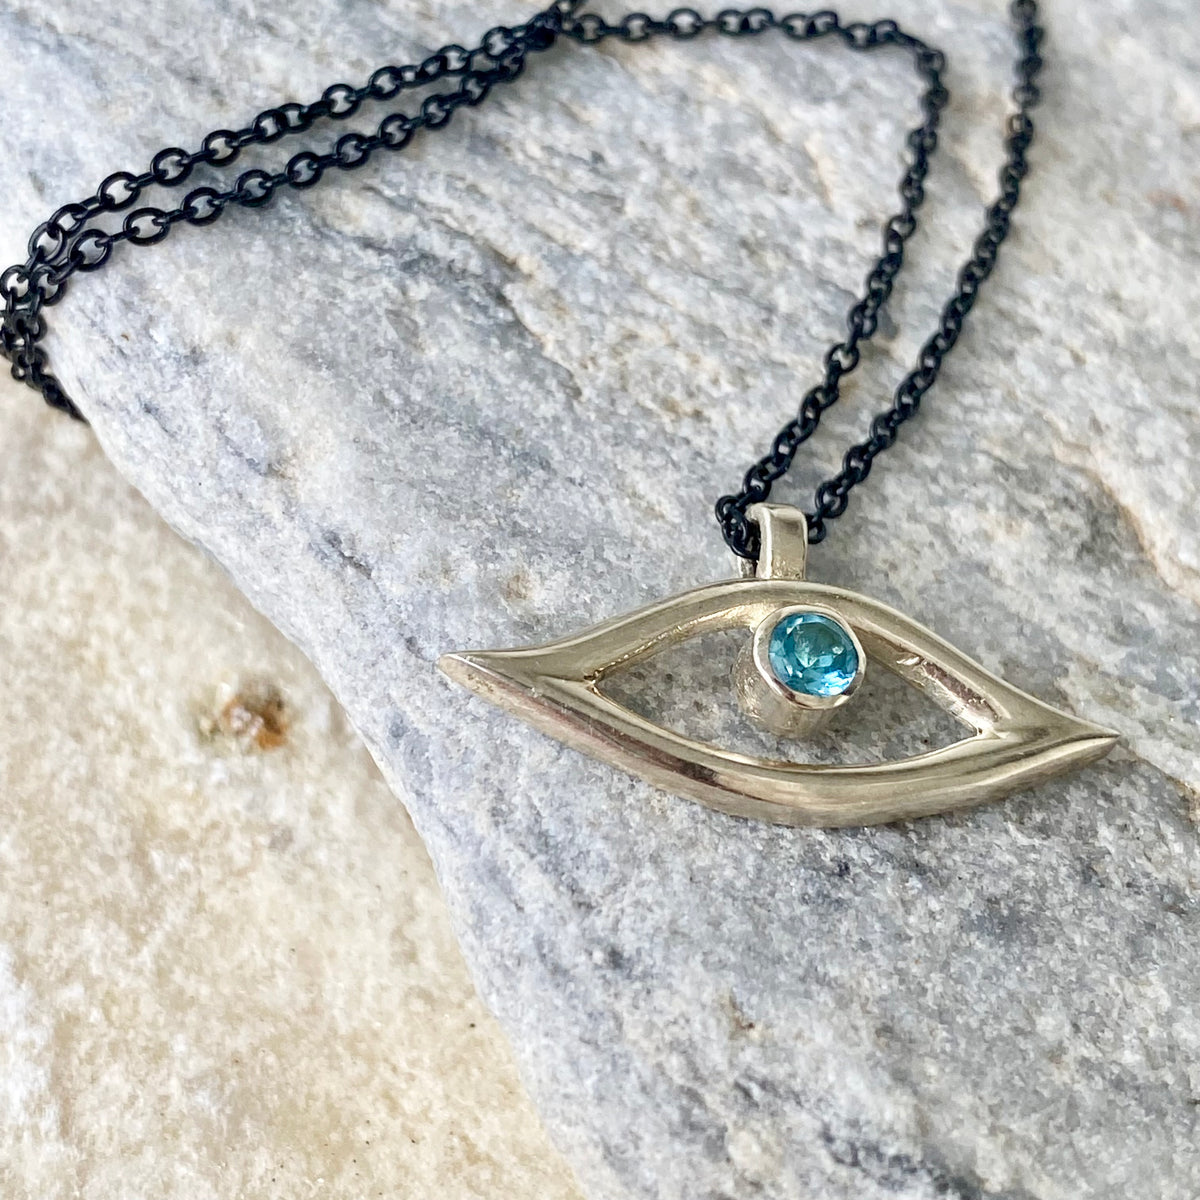 Evil eye necklace blue gem and black stainless steel chain